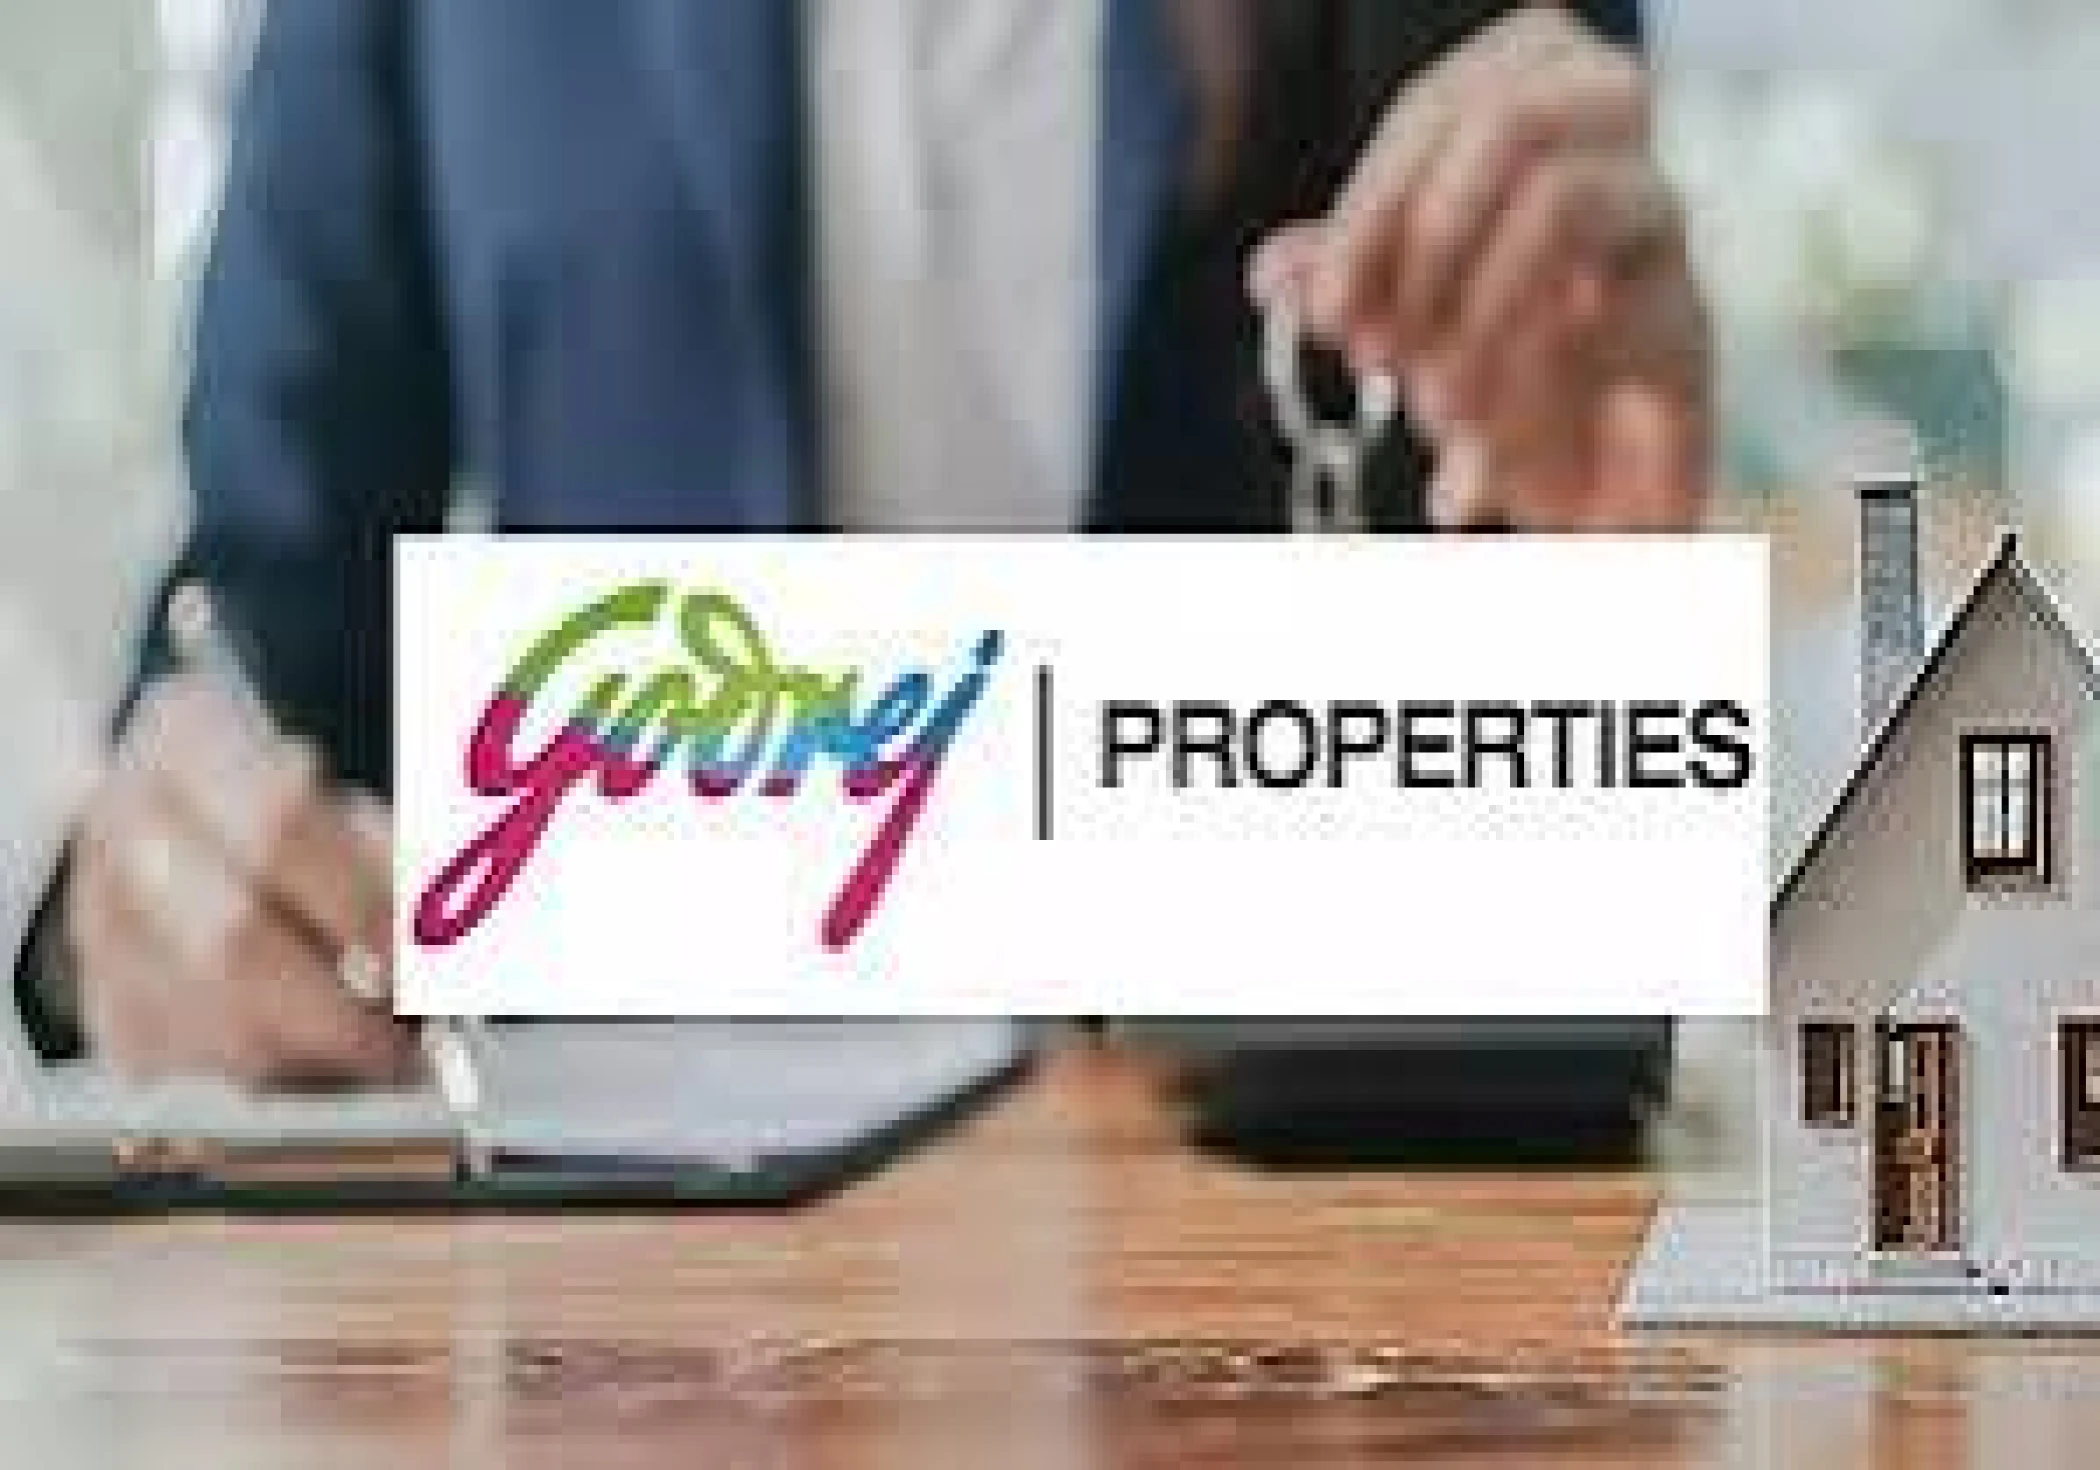 Godrej Properties buys a land parcel in Noida for ₹3,000 crore, expanding its NCR portfolio.